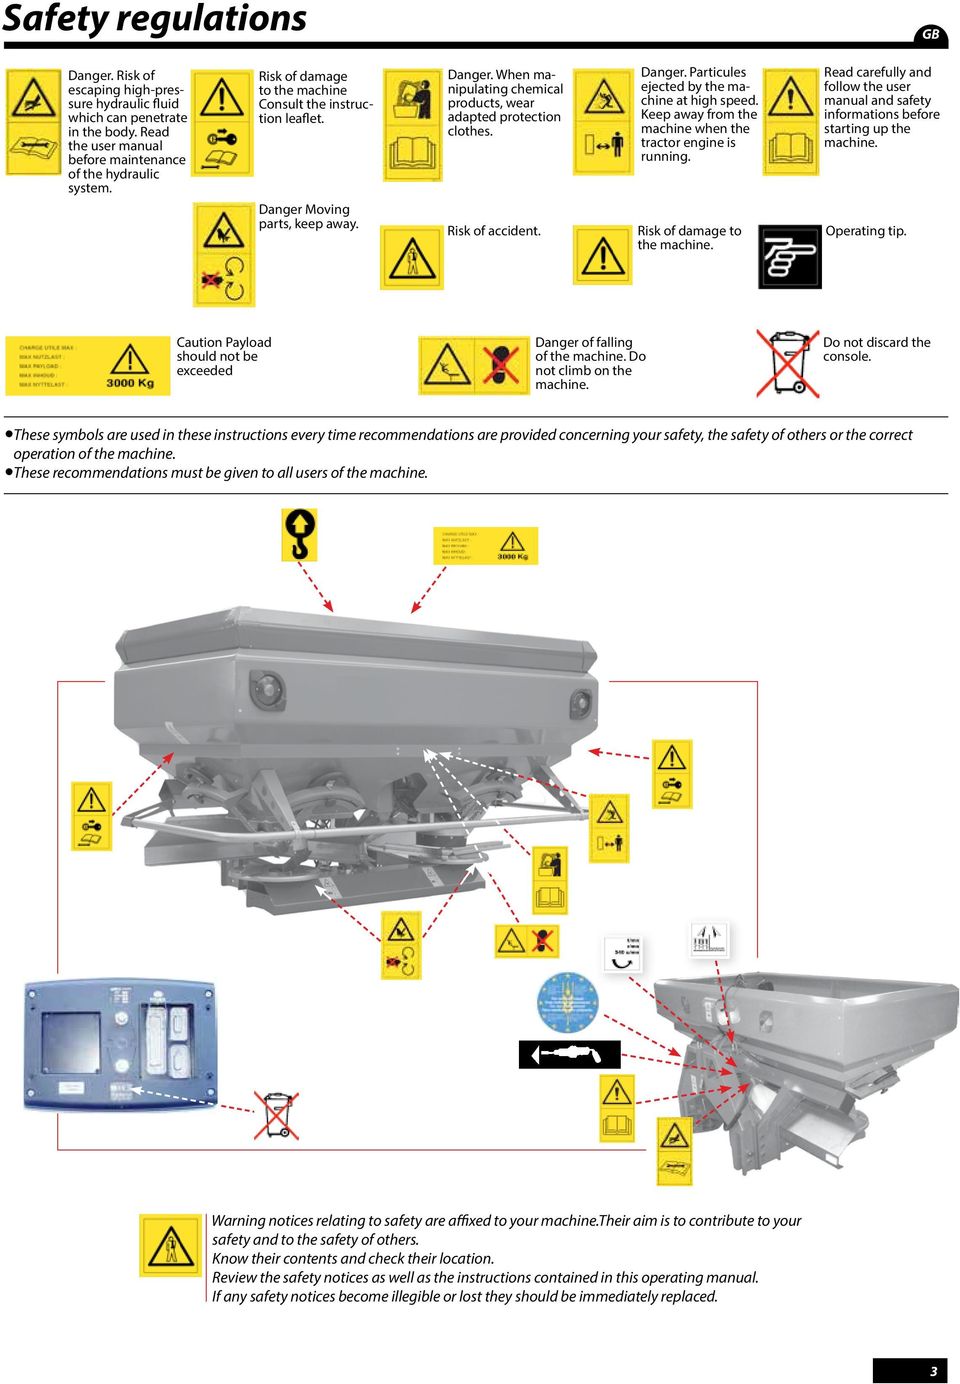 Keep away from the machine when the tractor engine is running. Read carefully and follow the user manual and safety informations before starting up the machine. Danger Moving parts, keep away.